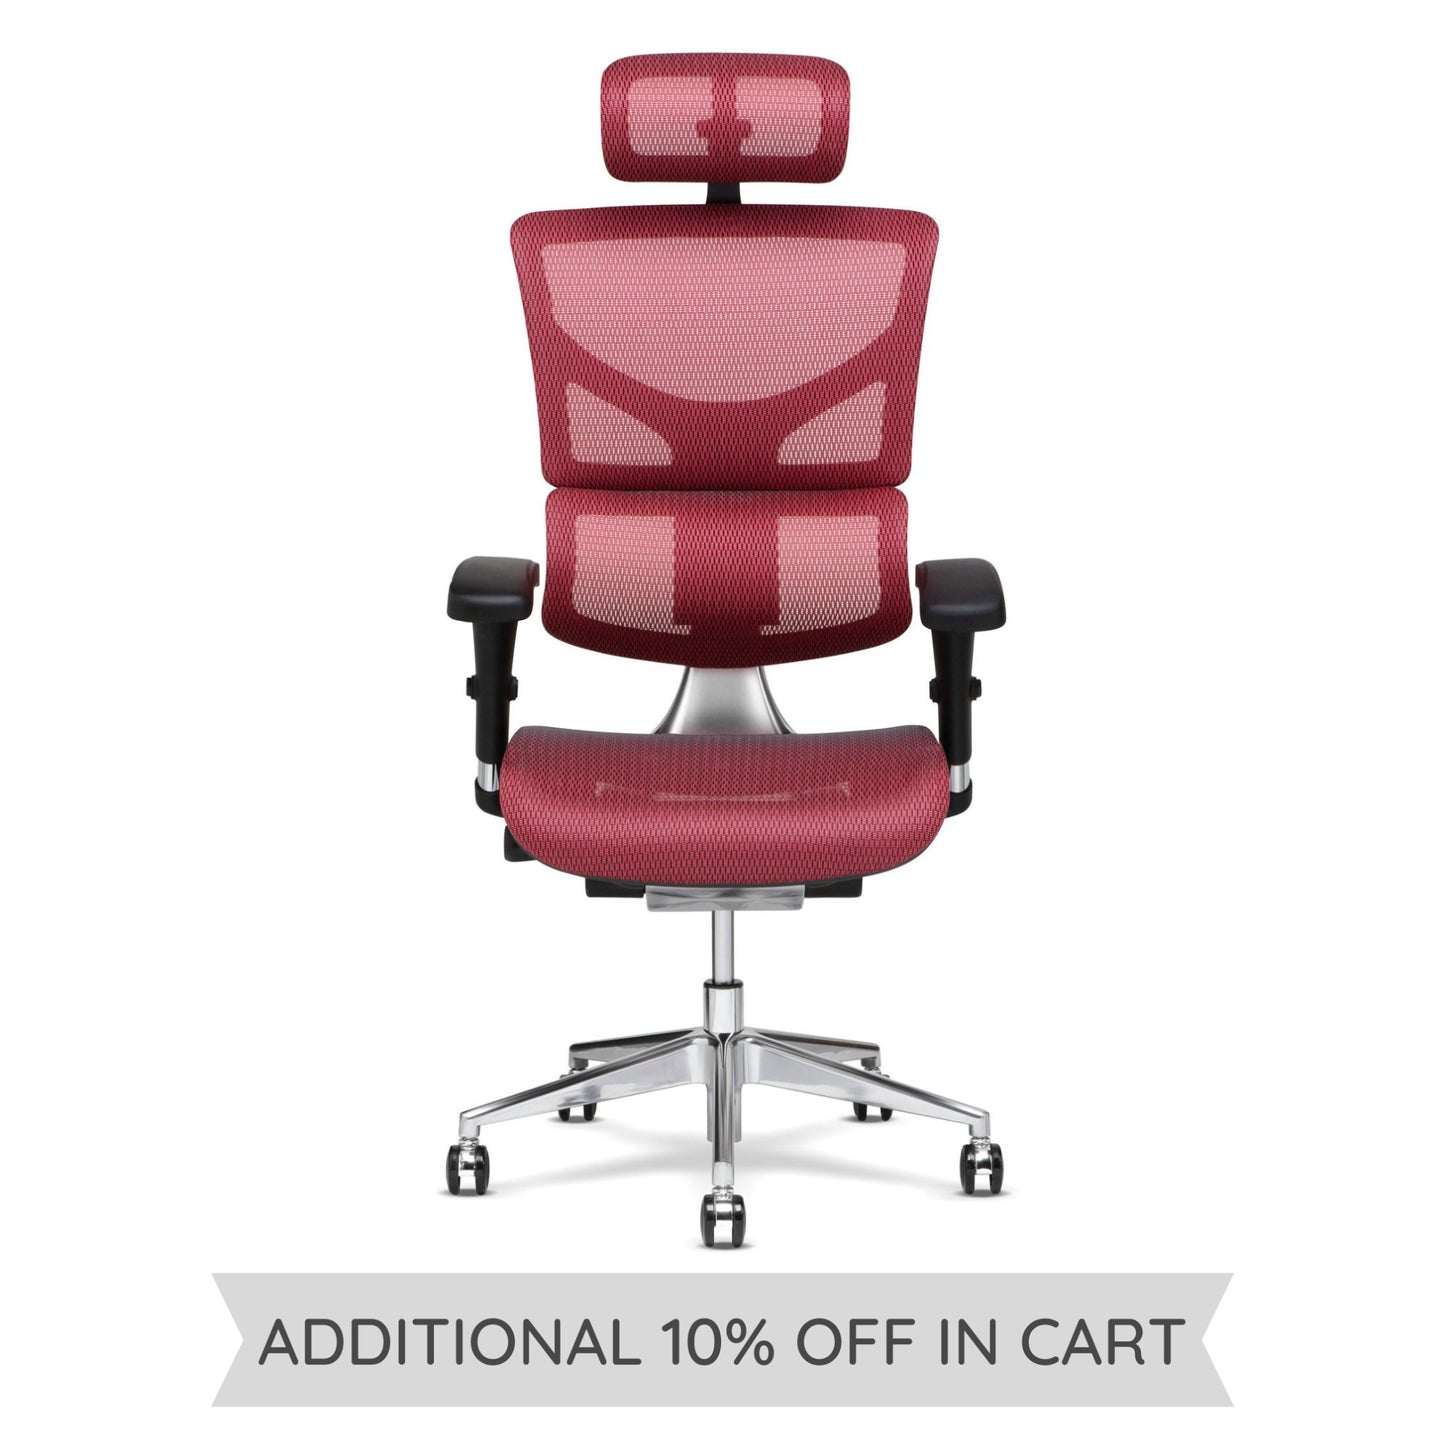 X2 K-Sport Management Chair by XChair - Wholesale Office Furniture